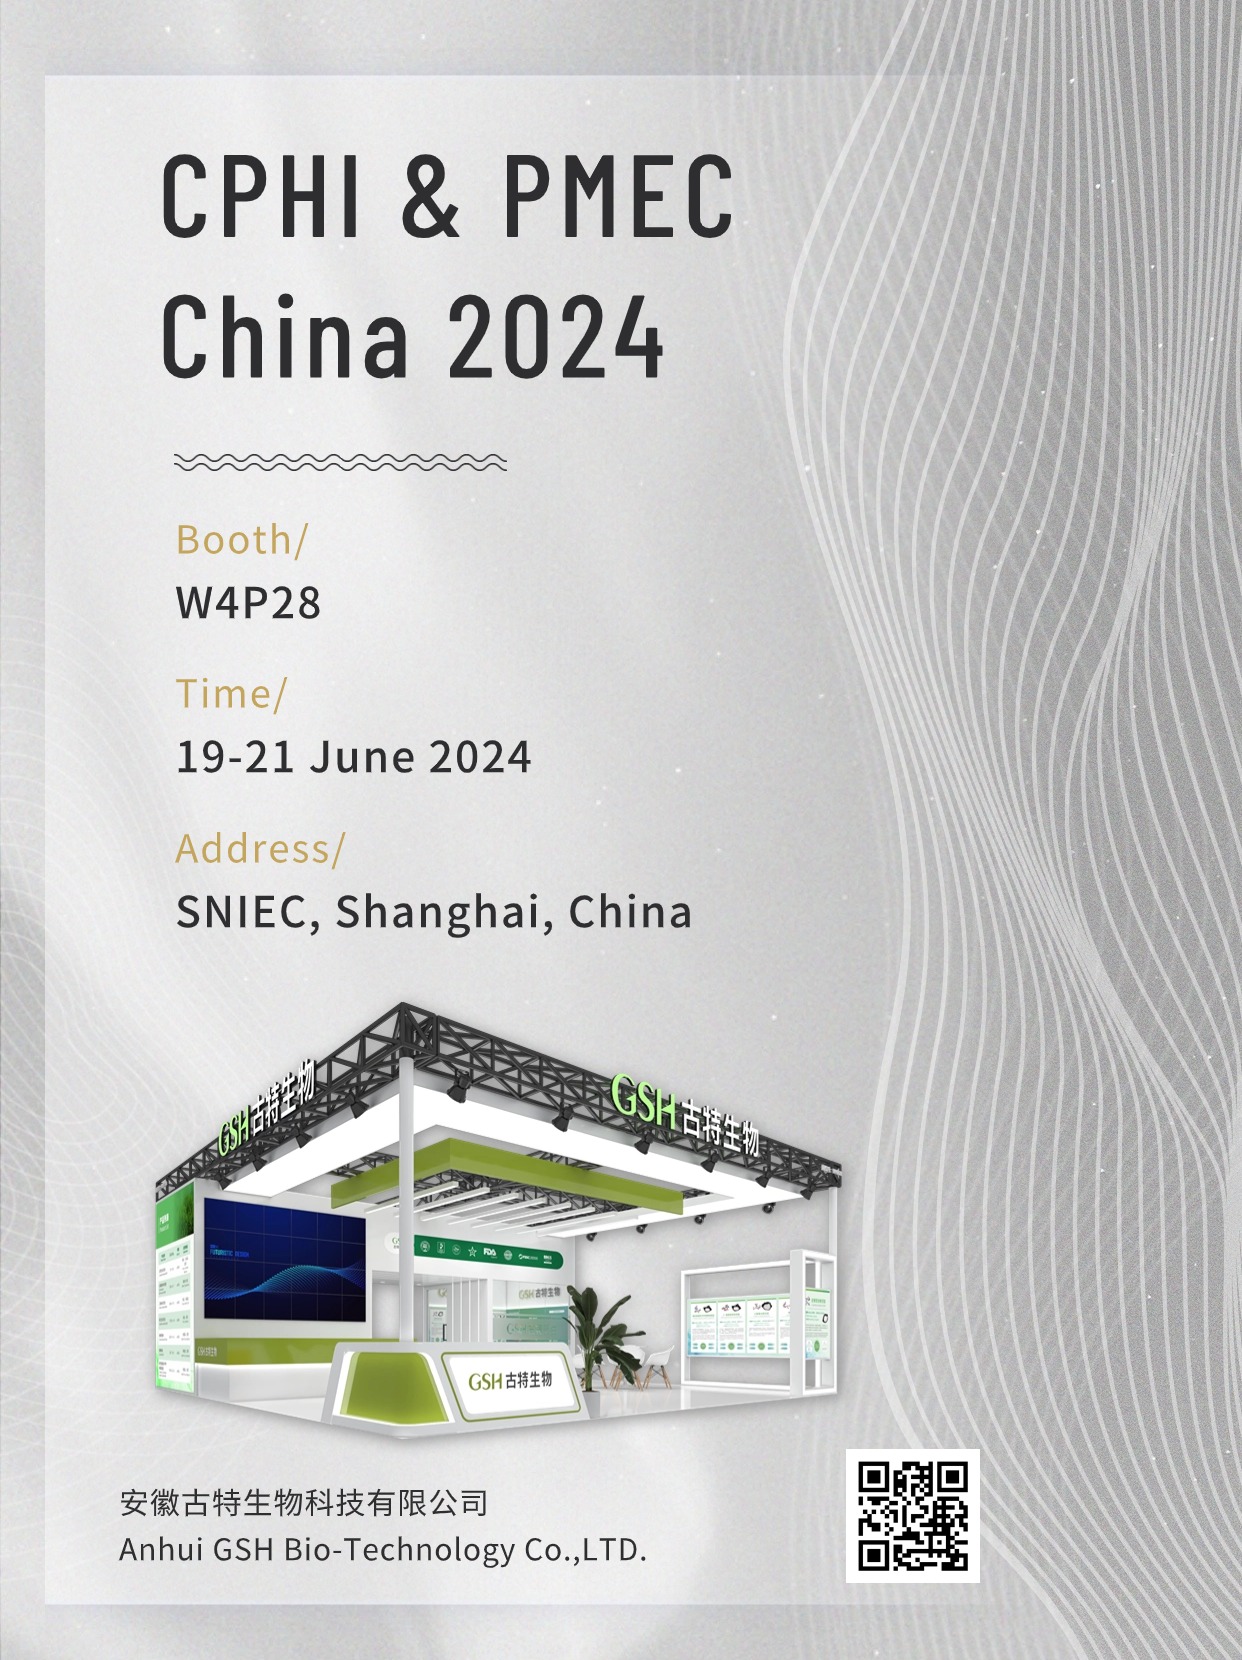 CPHI & PMEC China 2024 will be held again at SNIEC, Shanghai, China from June 19 to 21, 2024.